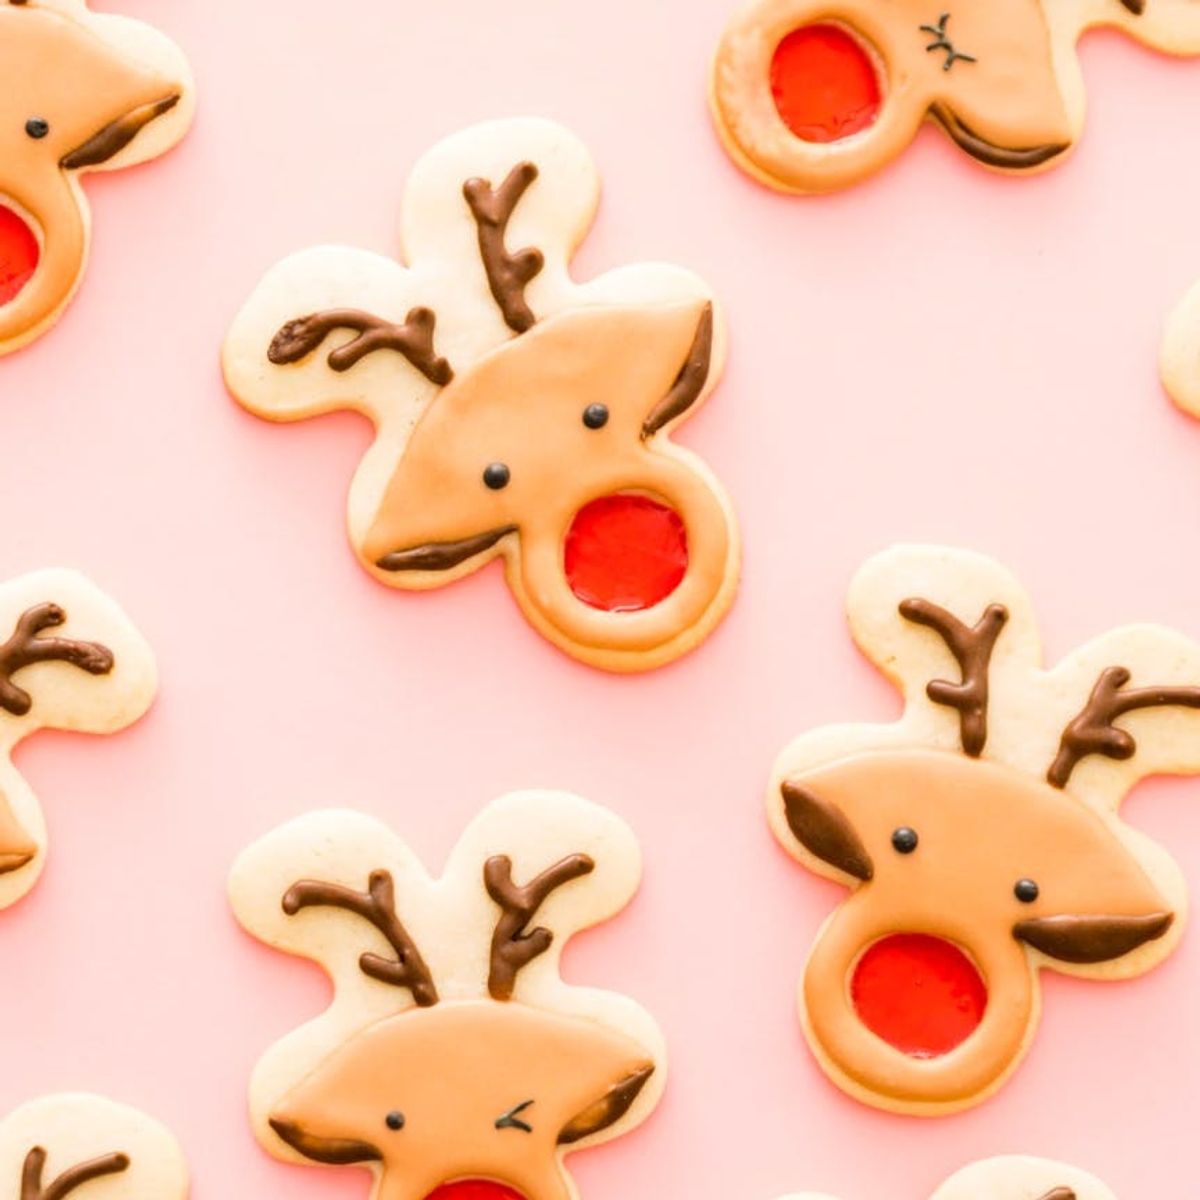 Pinterest’s Most Popular Holiday Cookie Recipes Will Get You in the Spirit of the Season